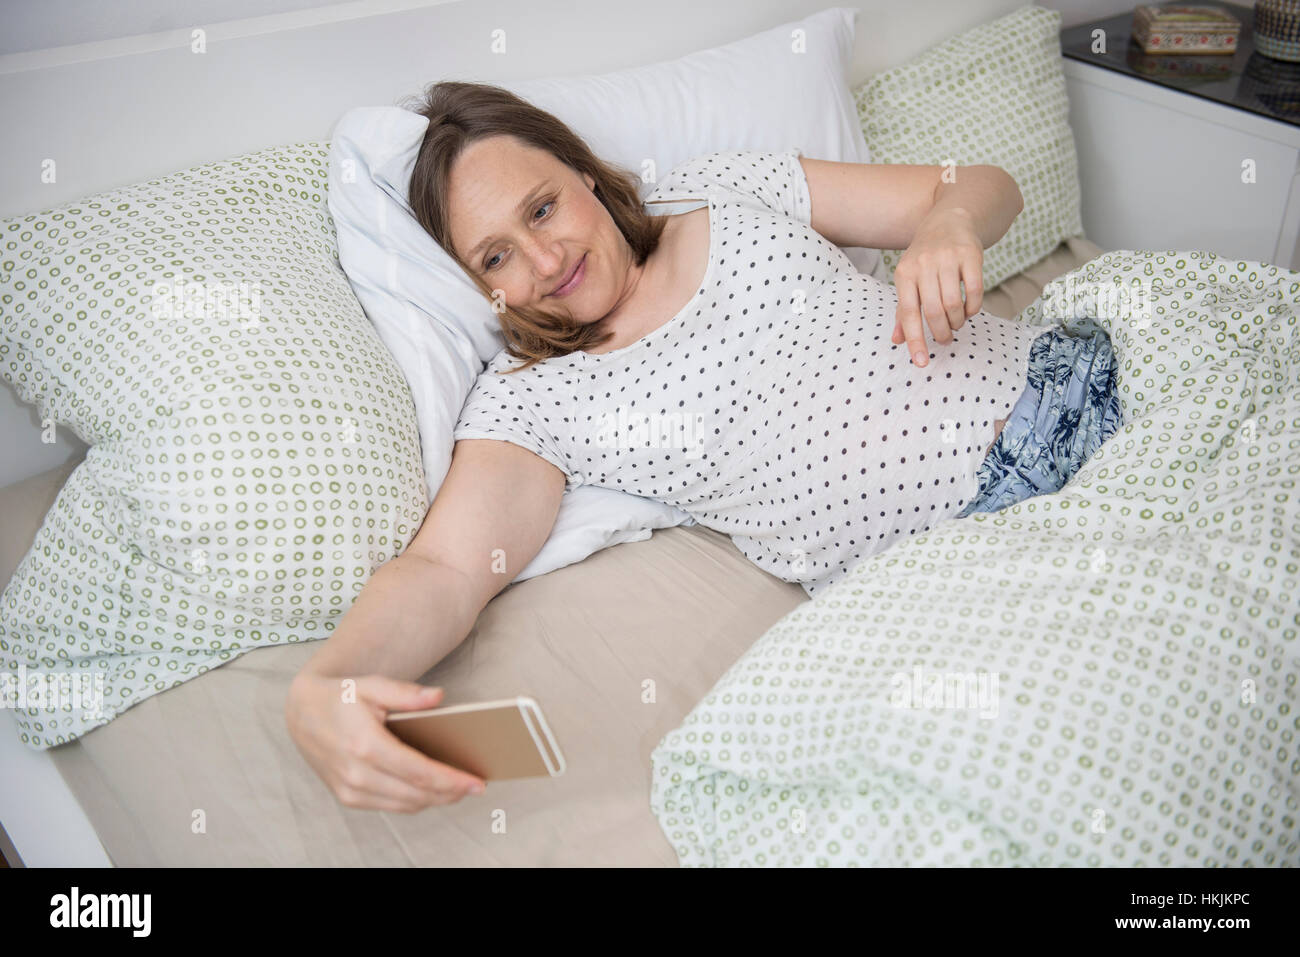 Pregnant woman lying in bed and taking selfie on mobile phone, Munich, Bavaria, Germany Stock Photo